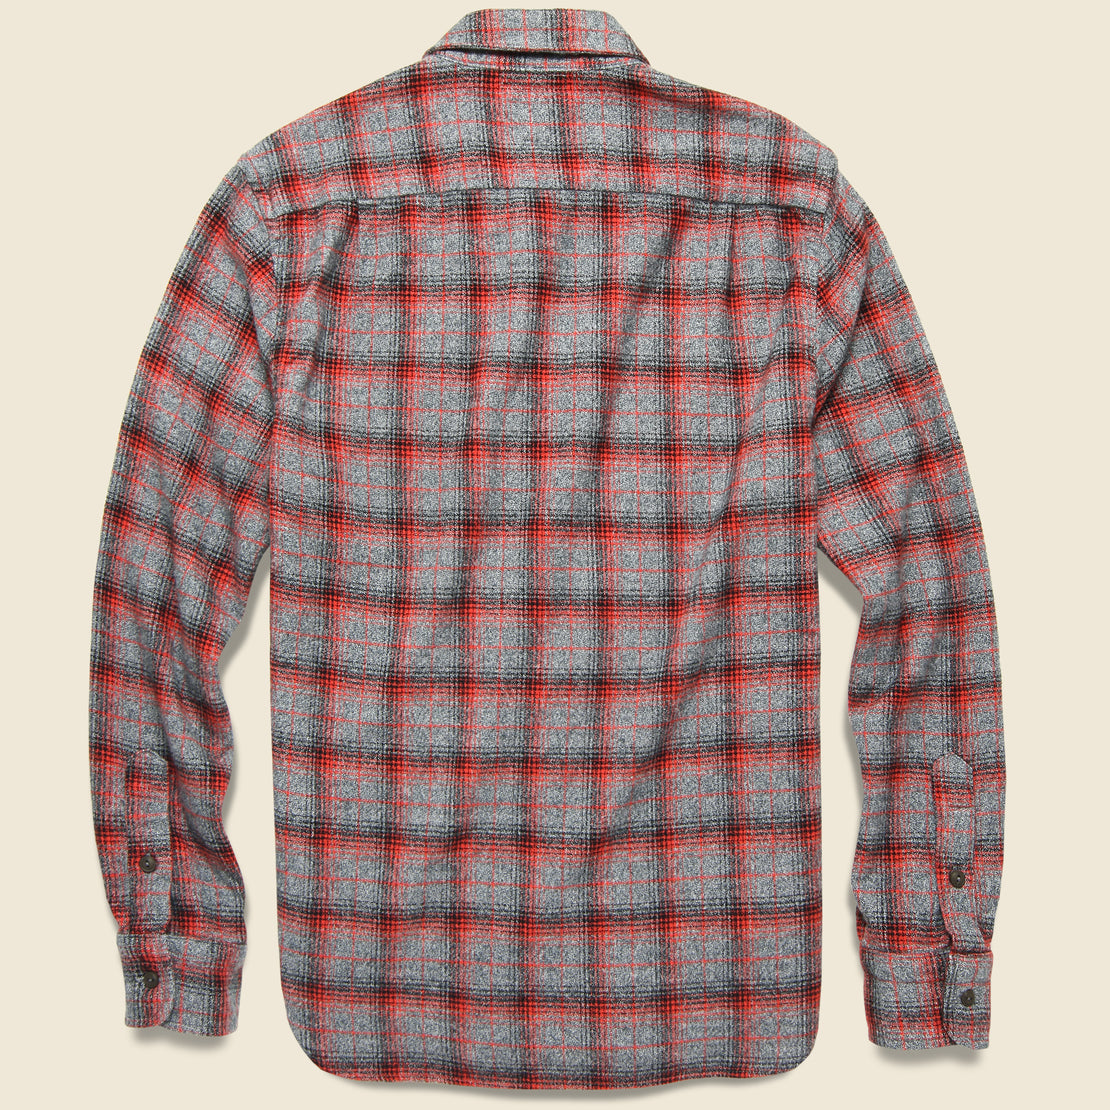 Ripper Flannel - Red Vintage Plaid - KATO - STAG Provisions - Tops - L/S Woven - Plaid